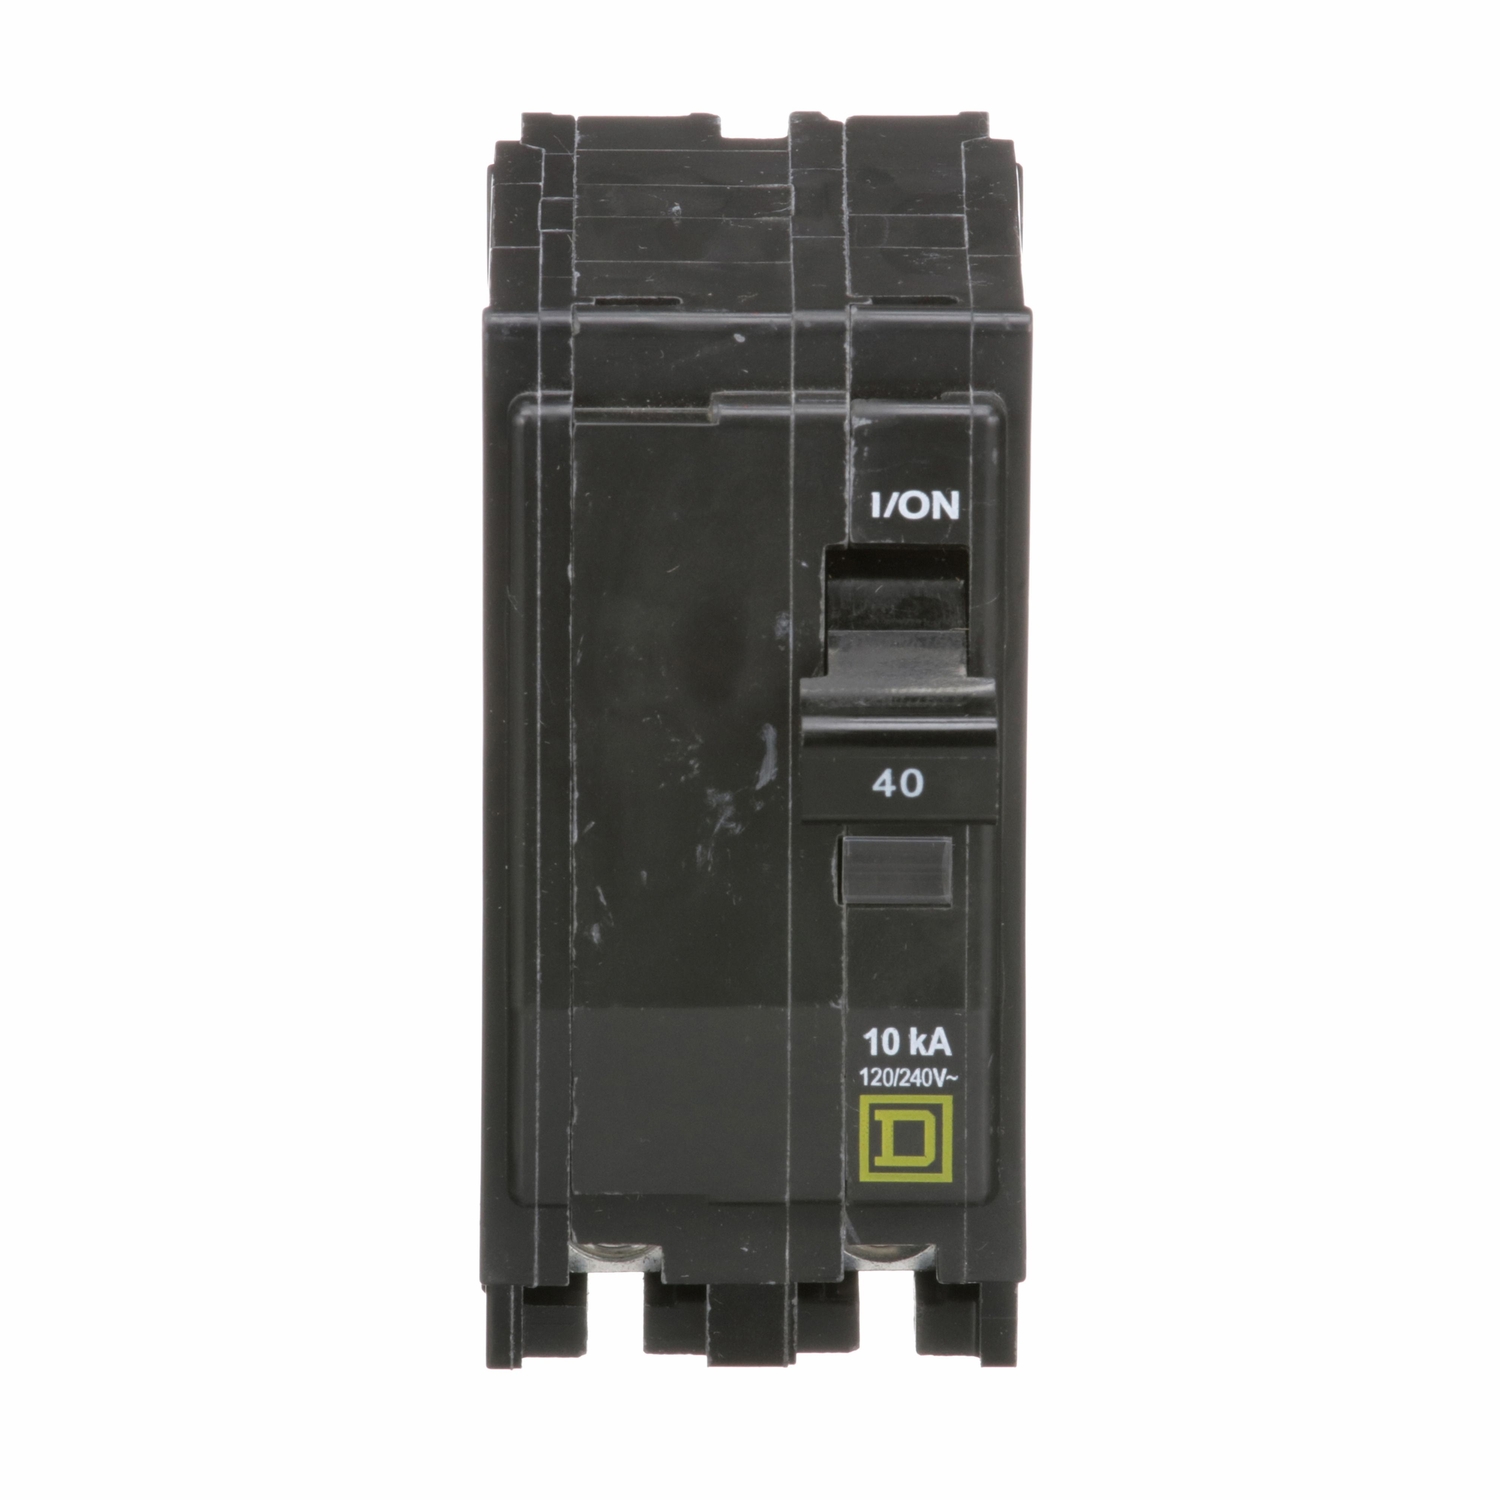 UPC 047569522192 product image for Square D 40 amps Plug In 2-Pole Circuit Breaker | upcitemdb.com